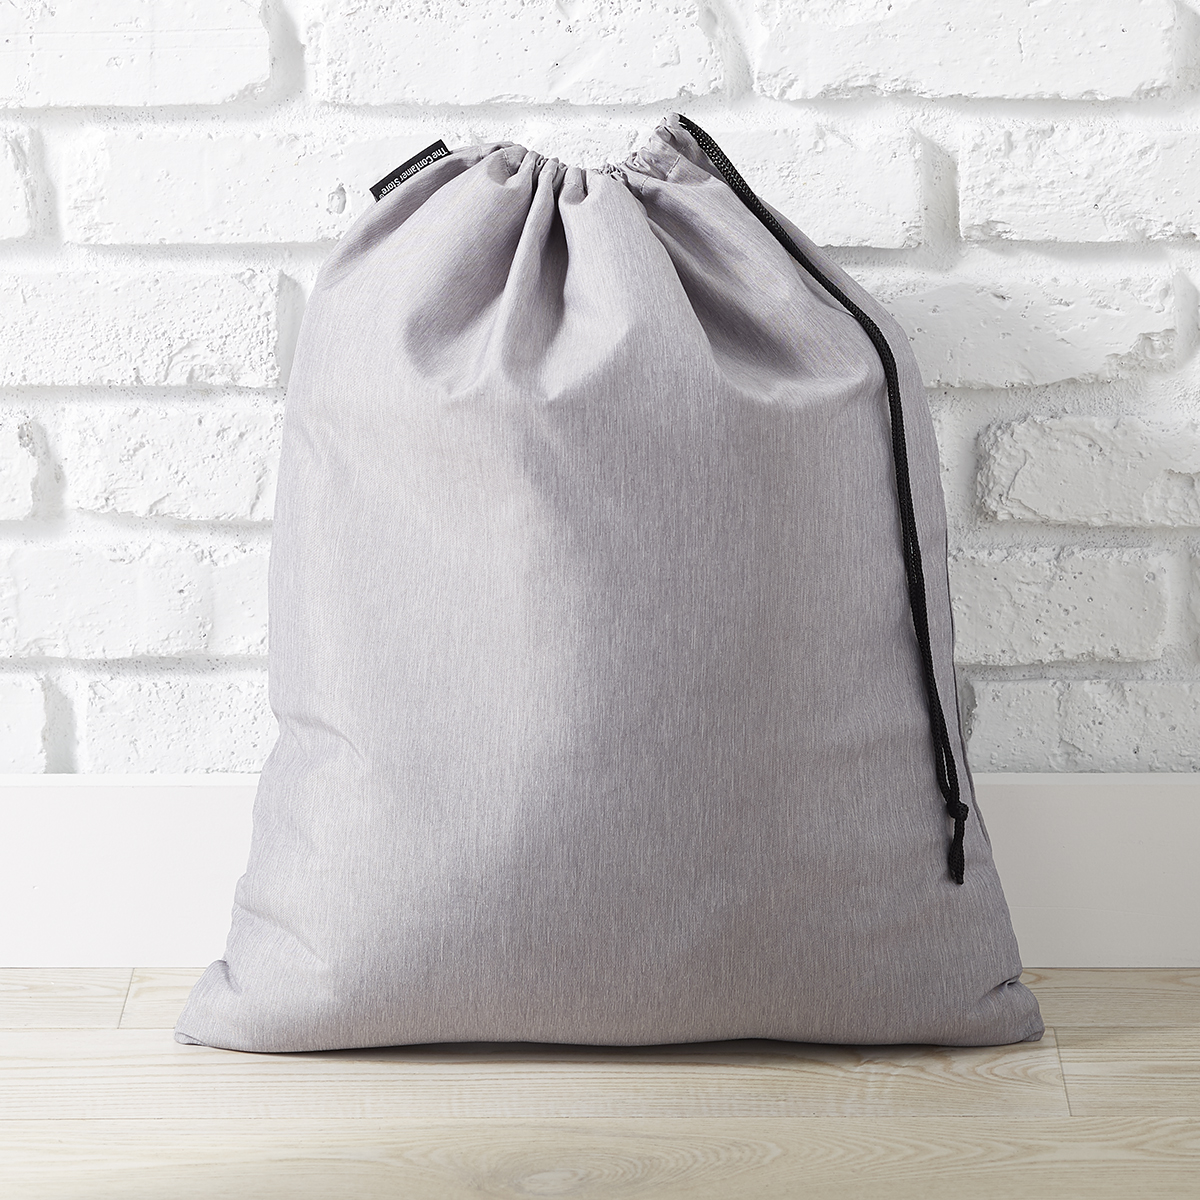 https://www.containerstore.com/catalogimages/391347/10081008-travel-laundry-bag-grey-PVL.jpg